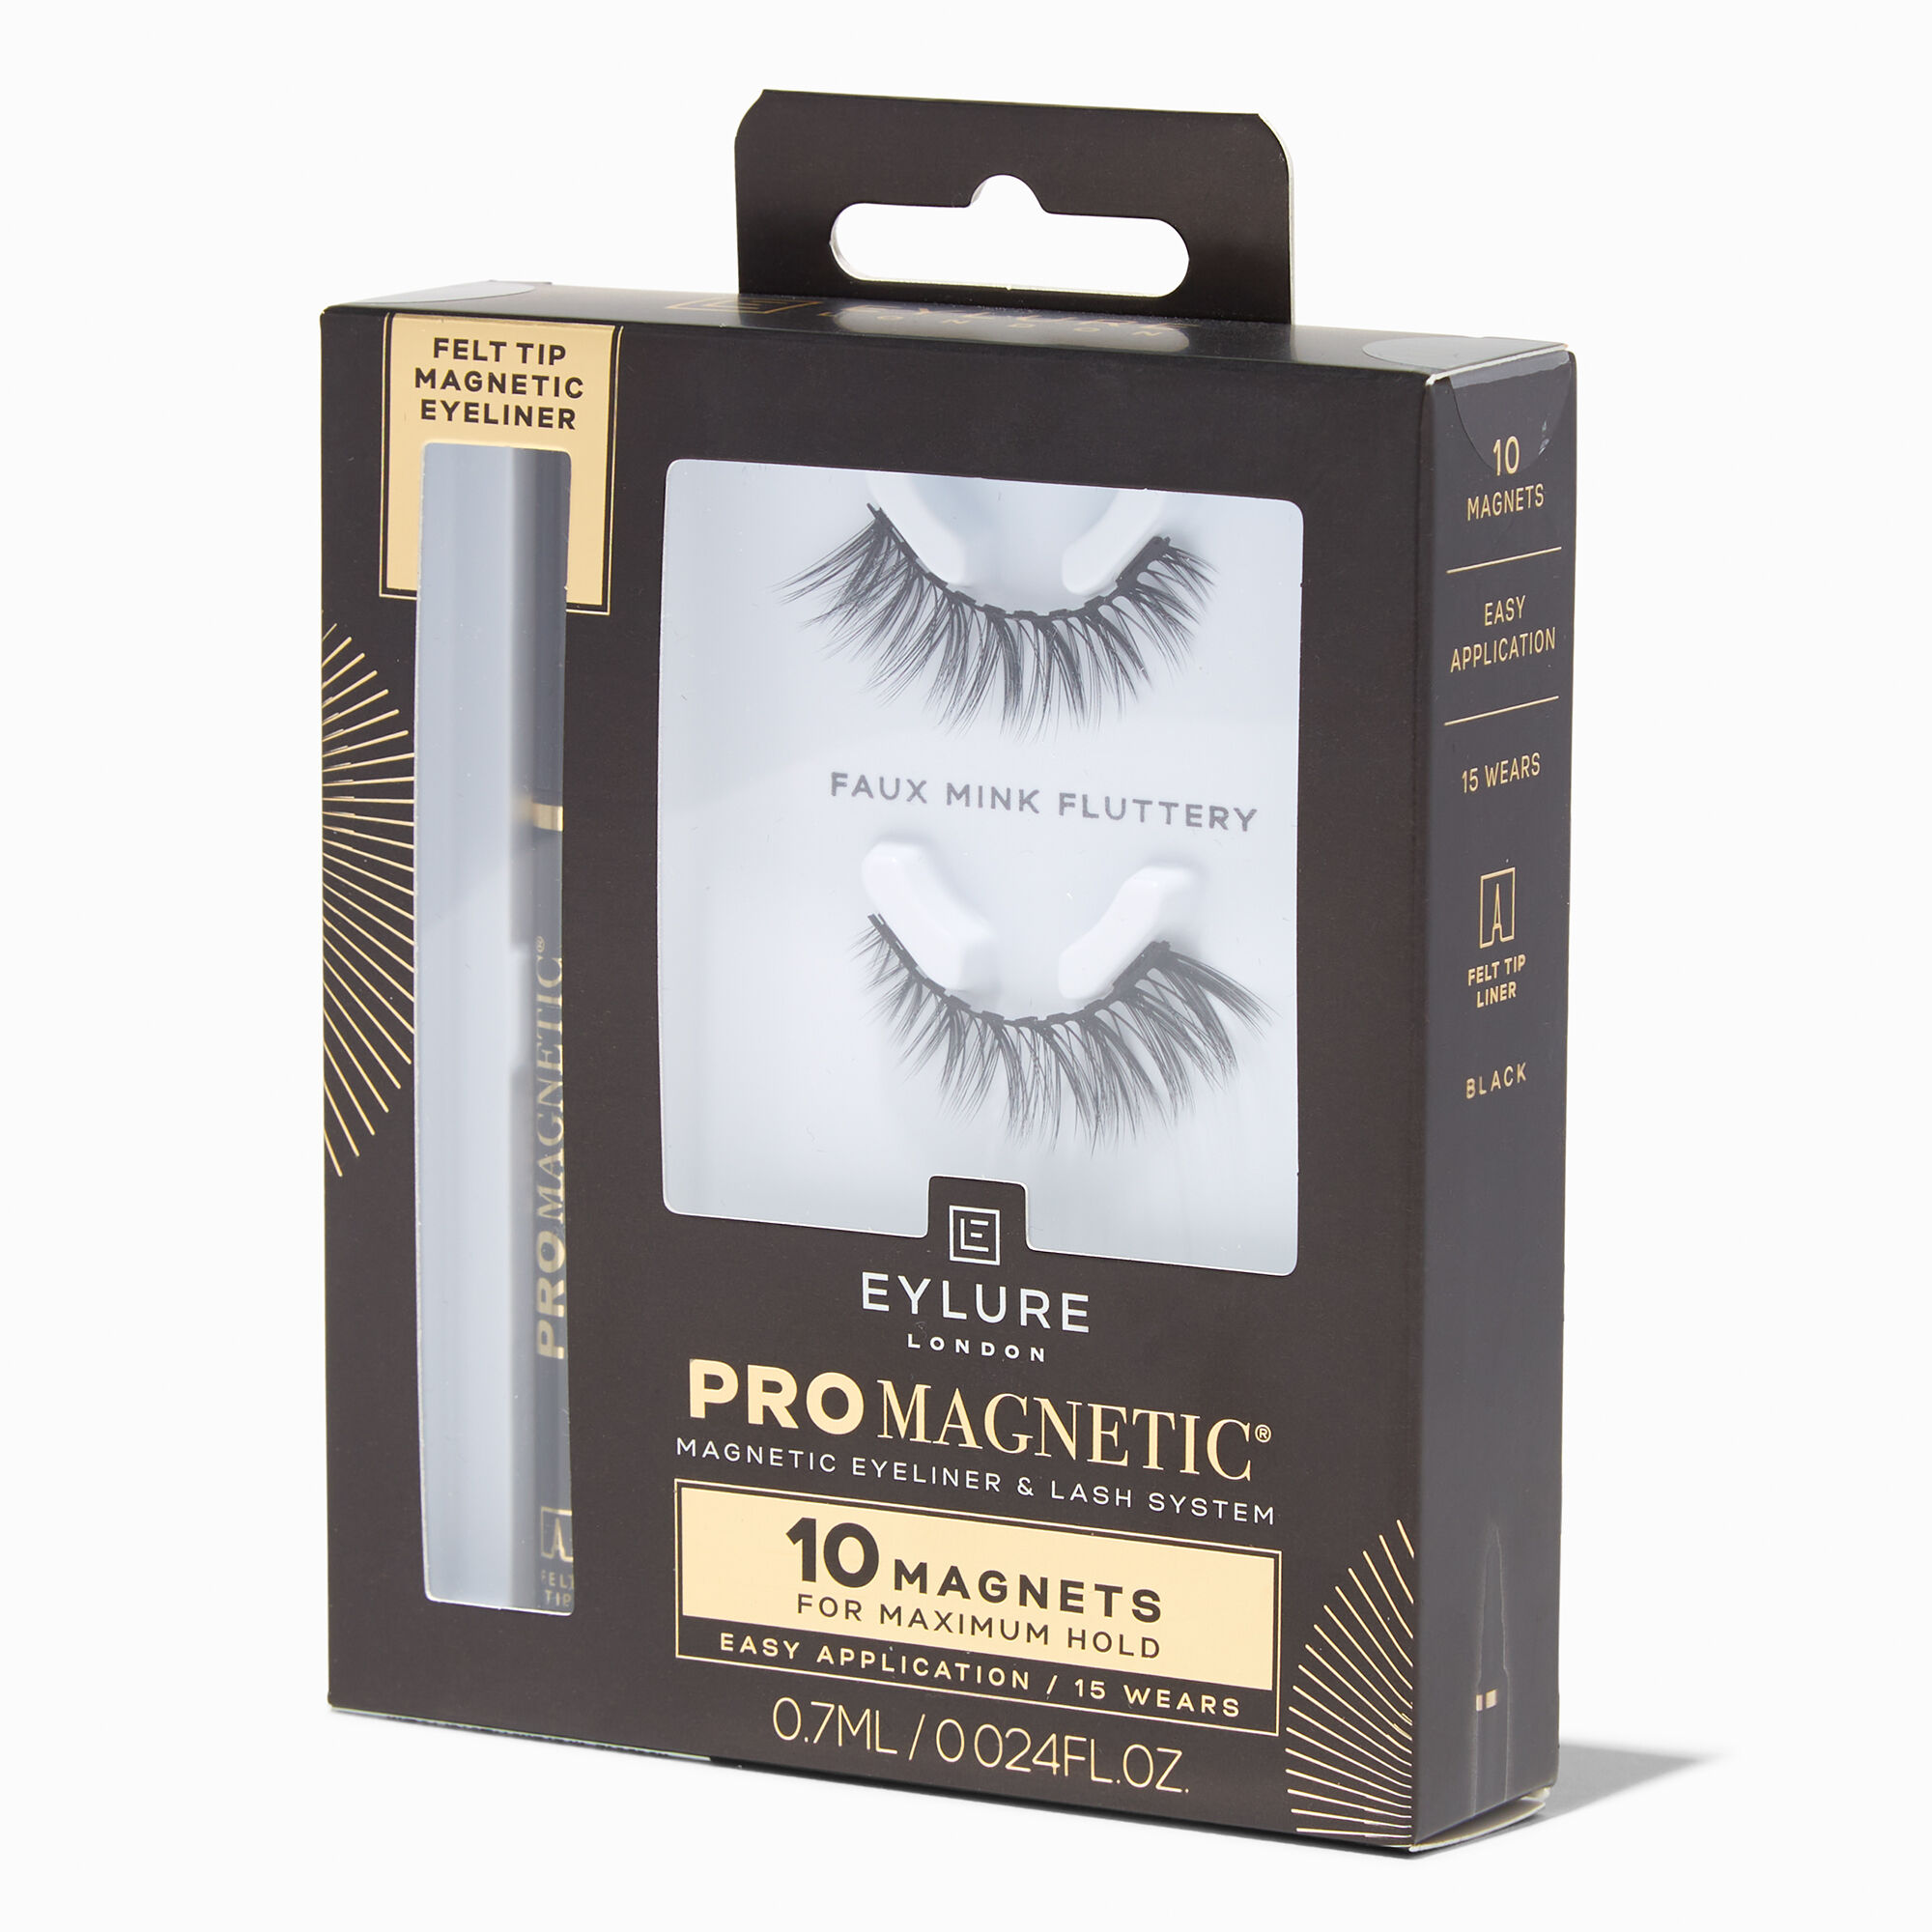 View Claires Eylure Pro Magnetic Eyeliner Lash System information